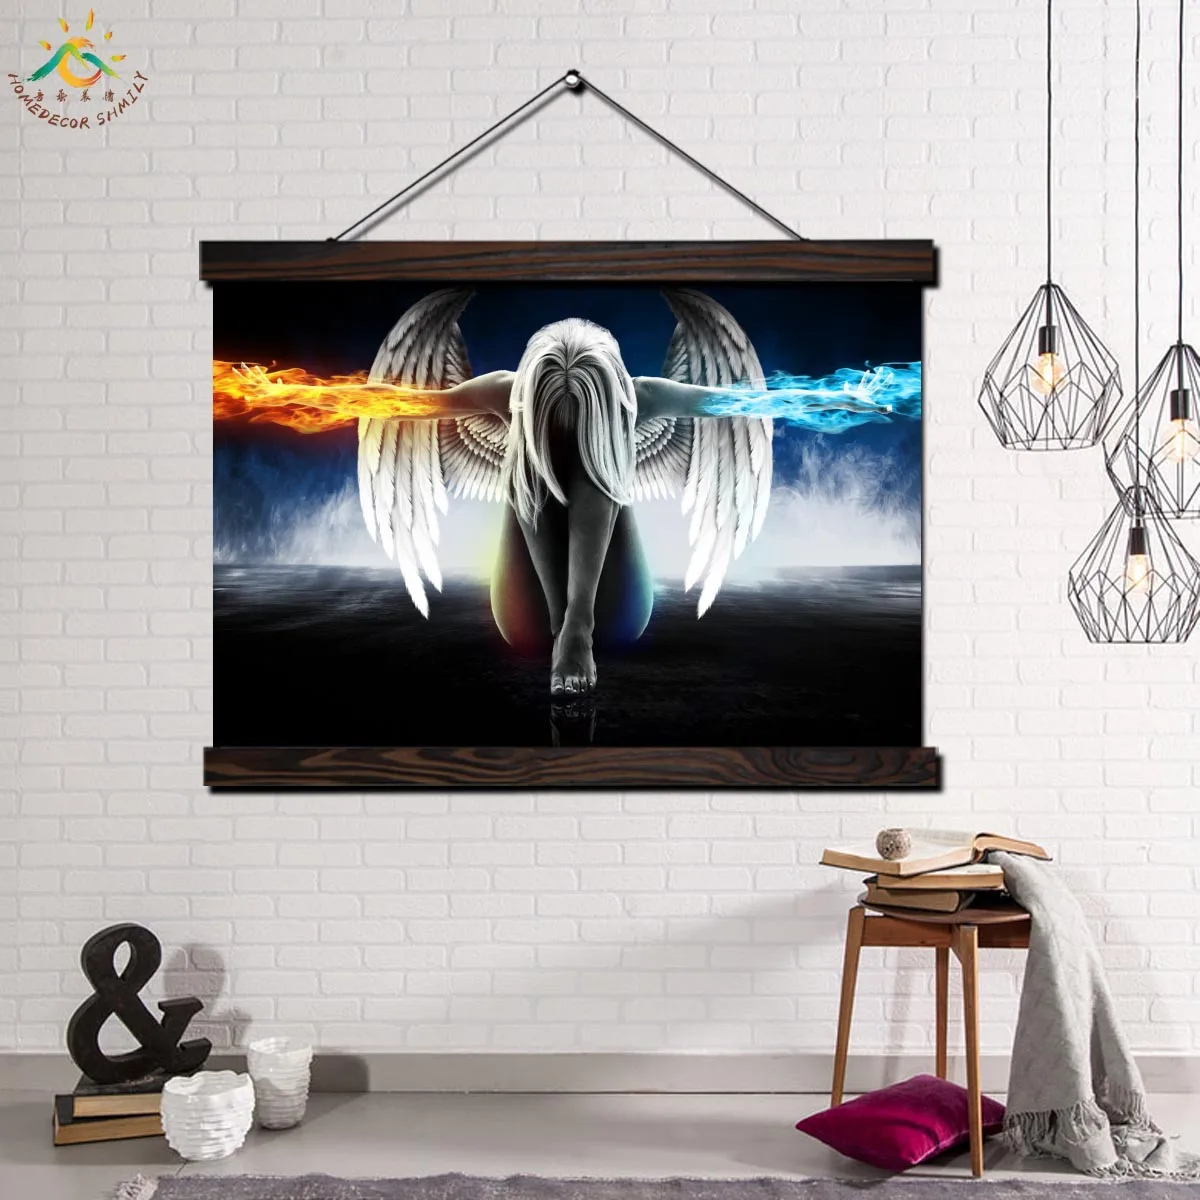 

Angel with Wings Single Modern Wall Art Print Pop Art Picture And Poster Frame Hanging Scroll Canvas Painting Home Decor